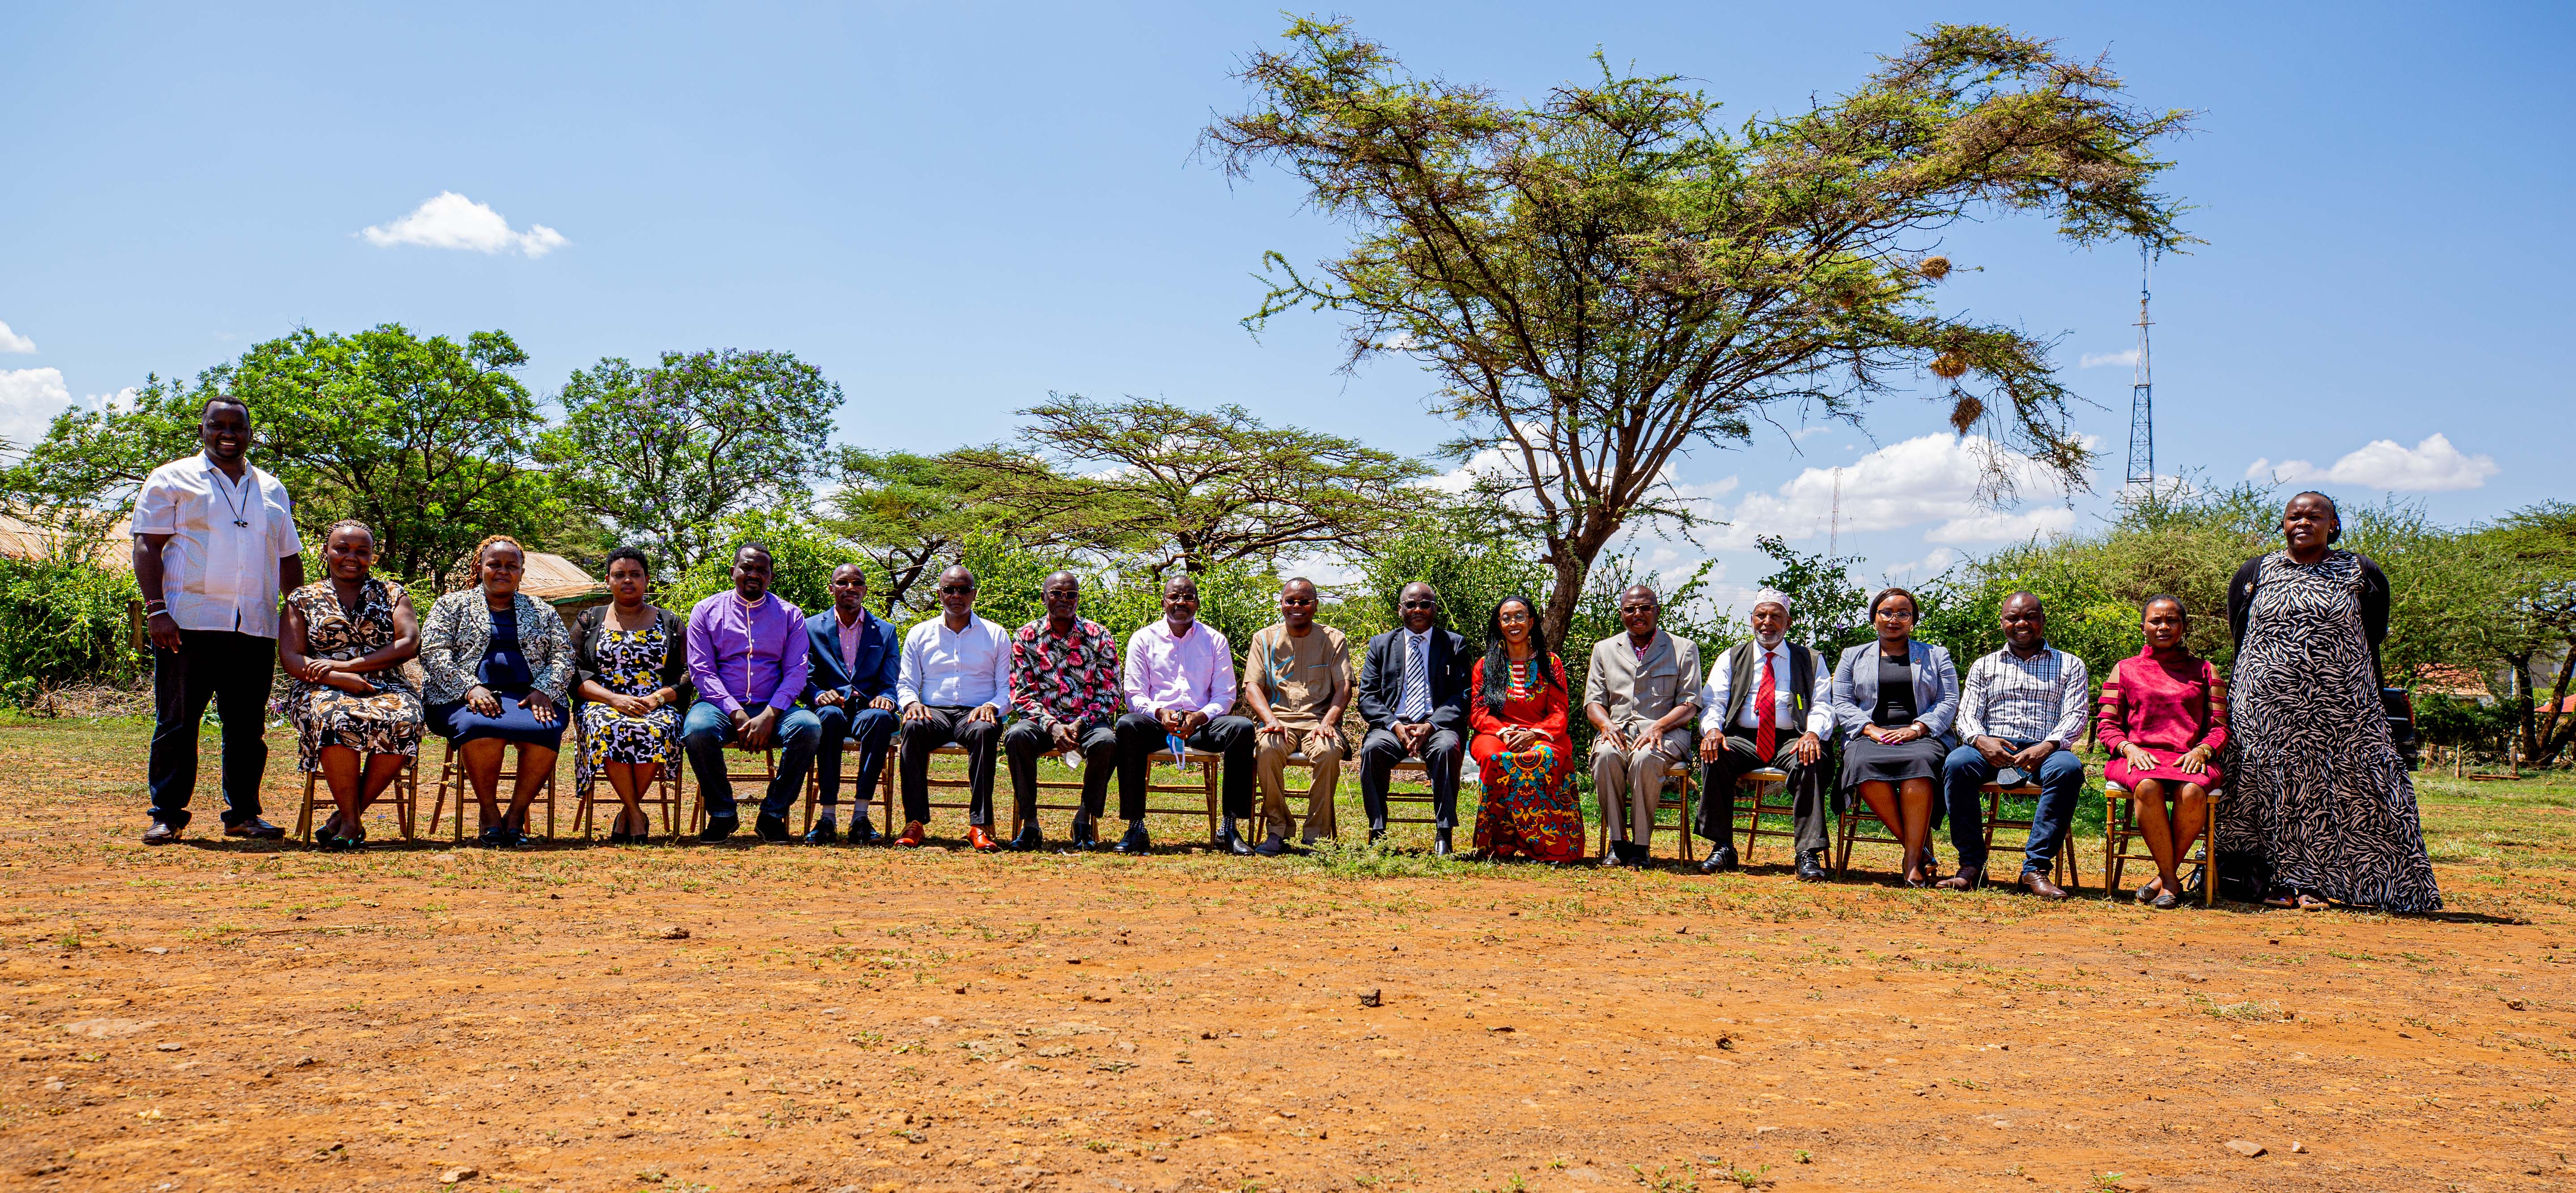 Group photo of Isiolo CUC members, Isiolo Elders, Judges and Ms Charity Kagwi, Head of the Crime Prevention and Criminal Justice at UNODC. Photo credit: Fahmo Mohammed/2021